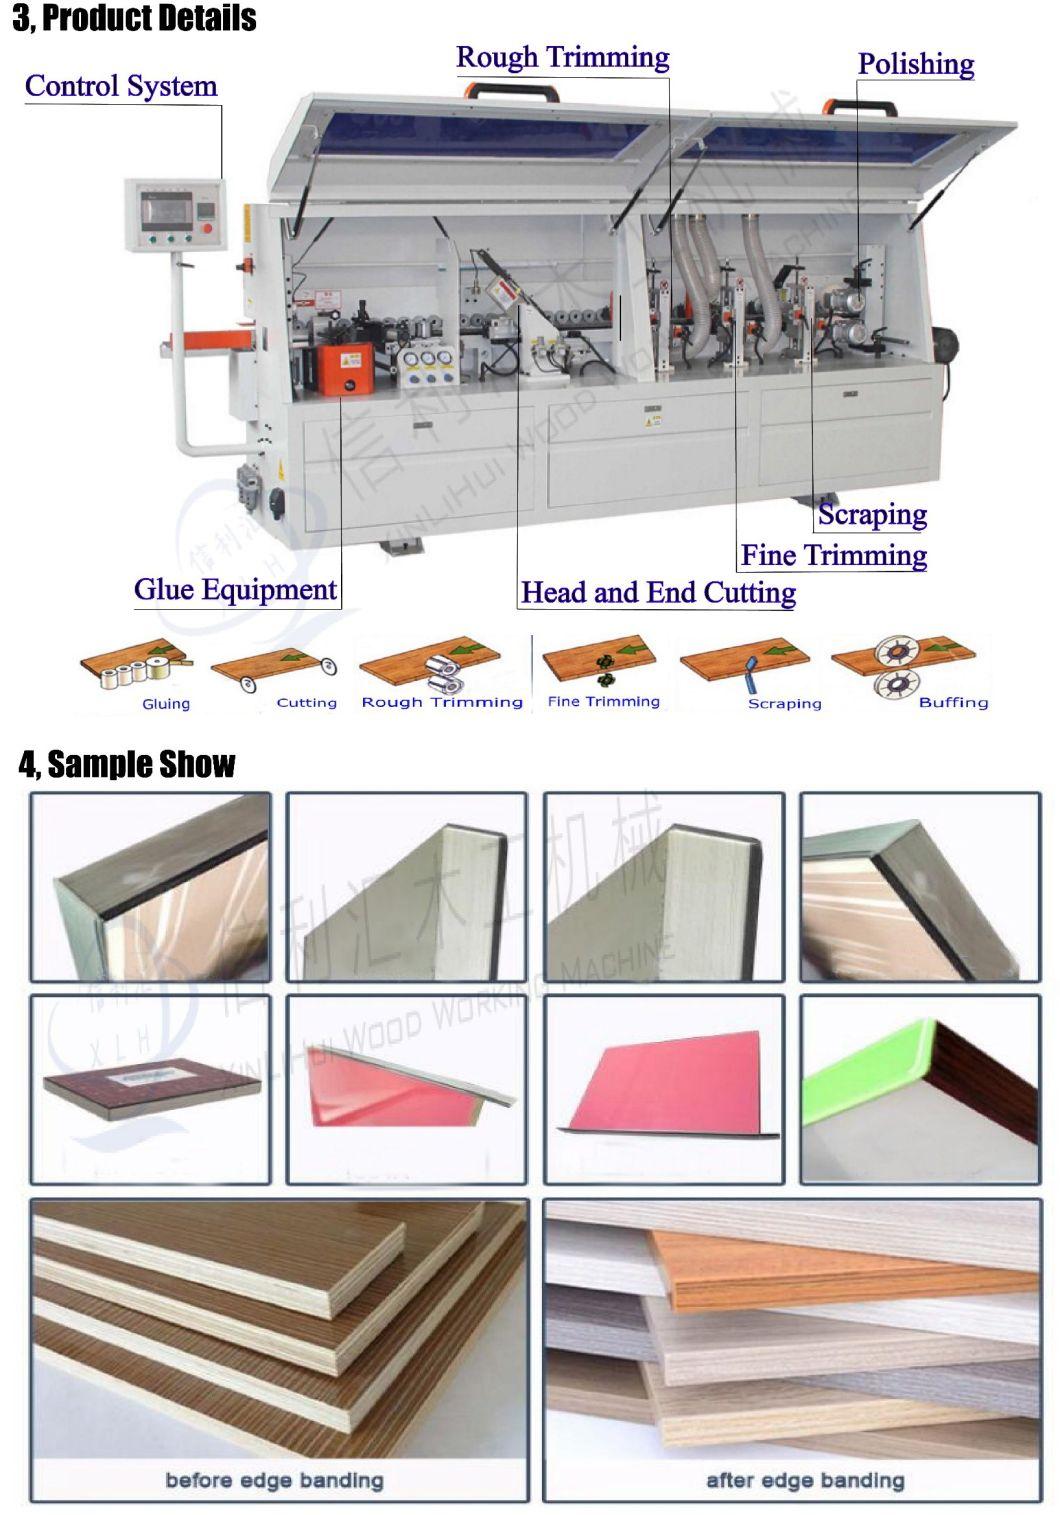 Mf-506 Automatic Wood Edge Banding Machine with Buffing, Scraping, Fine Triming, Rough Triming, End Triming, Gluing, Drilling, Corner Triming, Pre-Miling